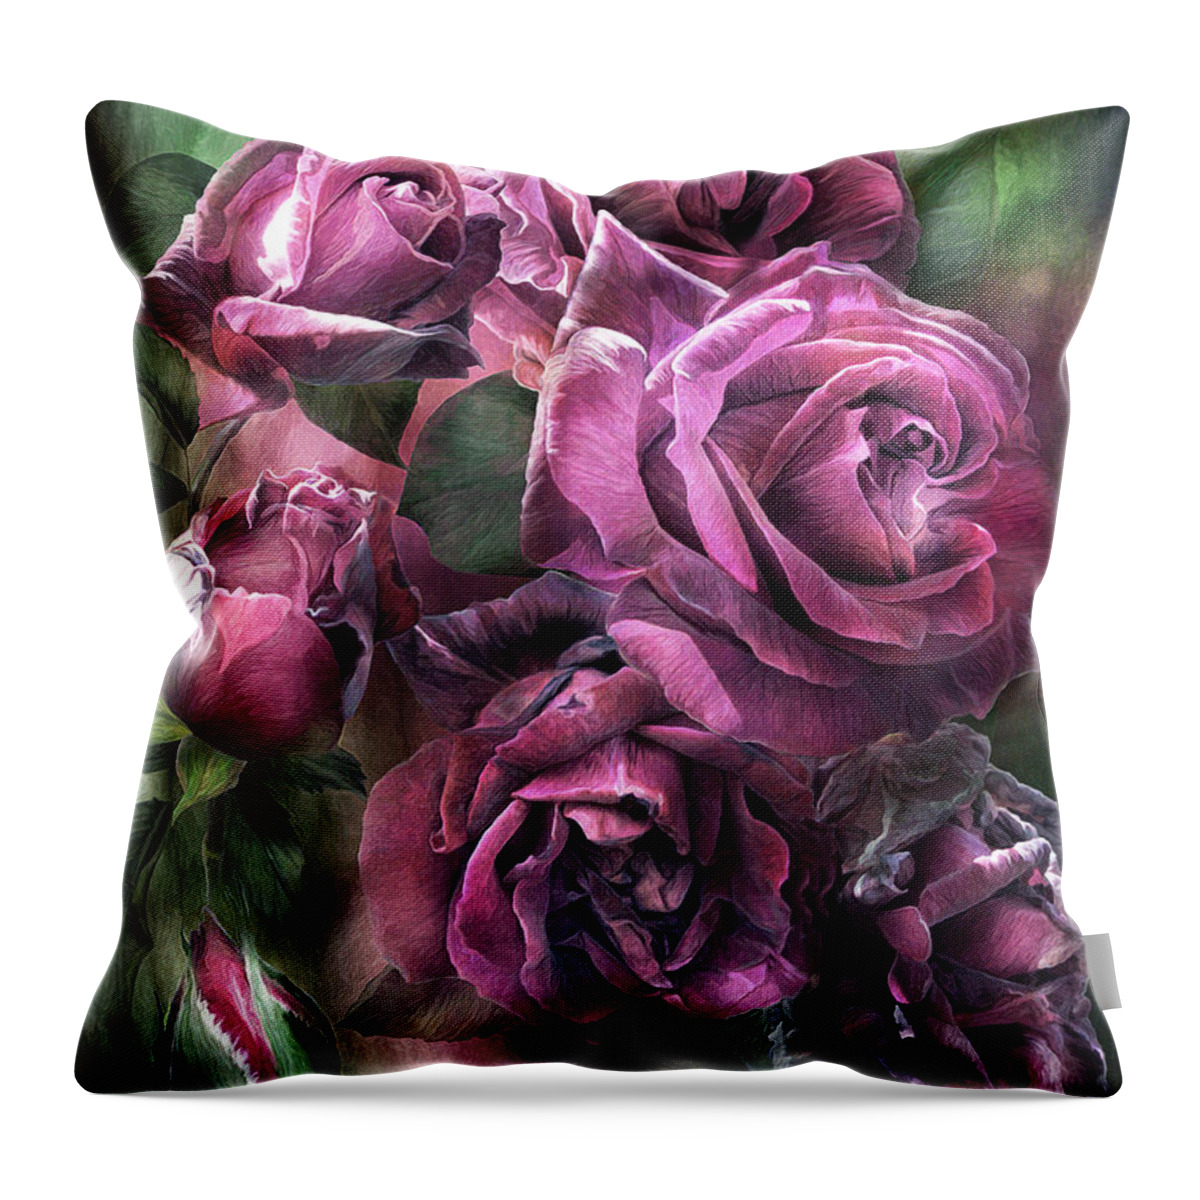 Rose Throw Pillow featuring the mixed media To Be Loved - Mauve Rose by Carol Cavalaris